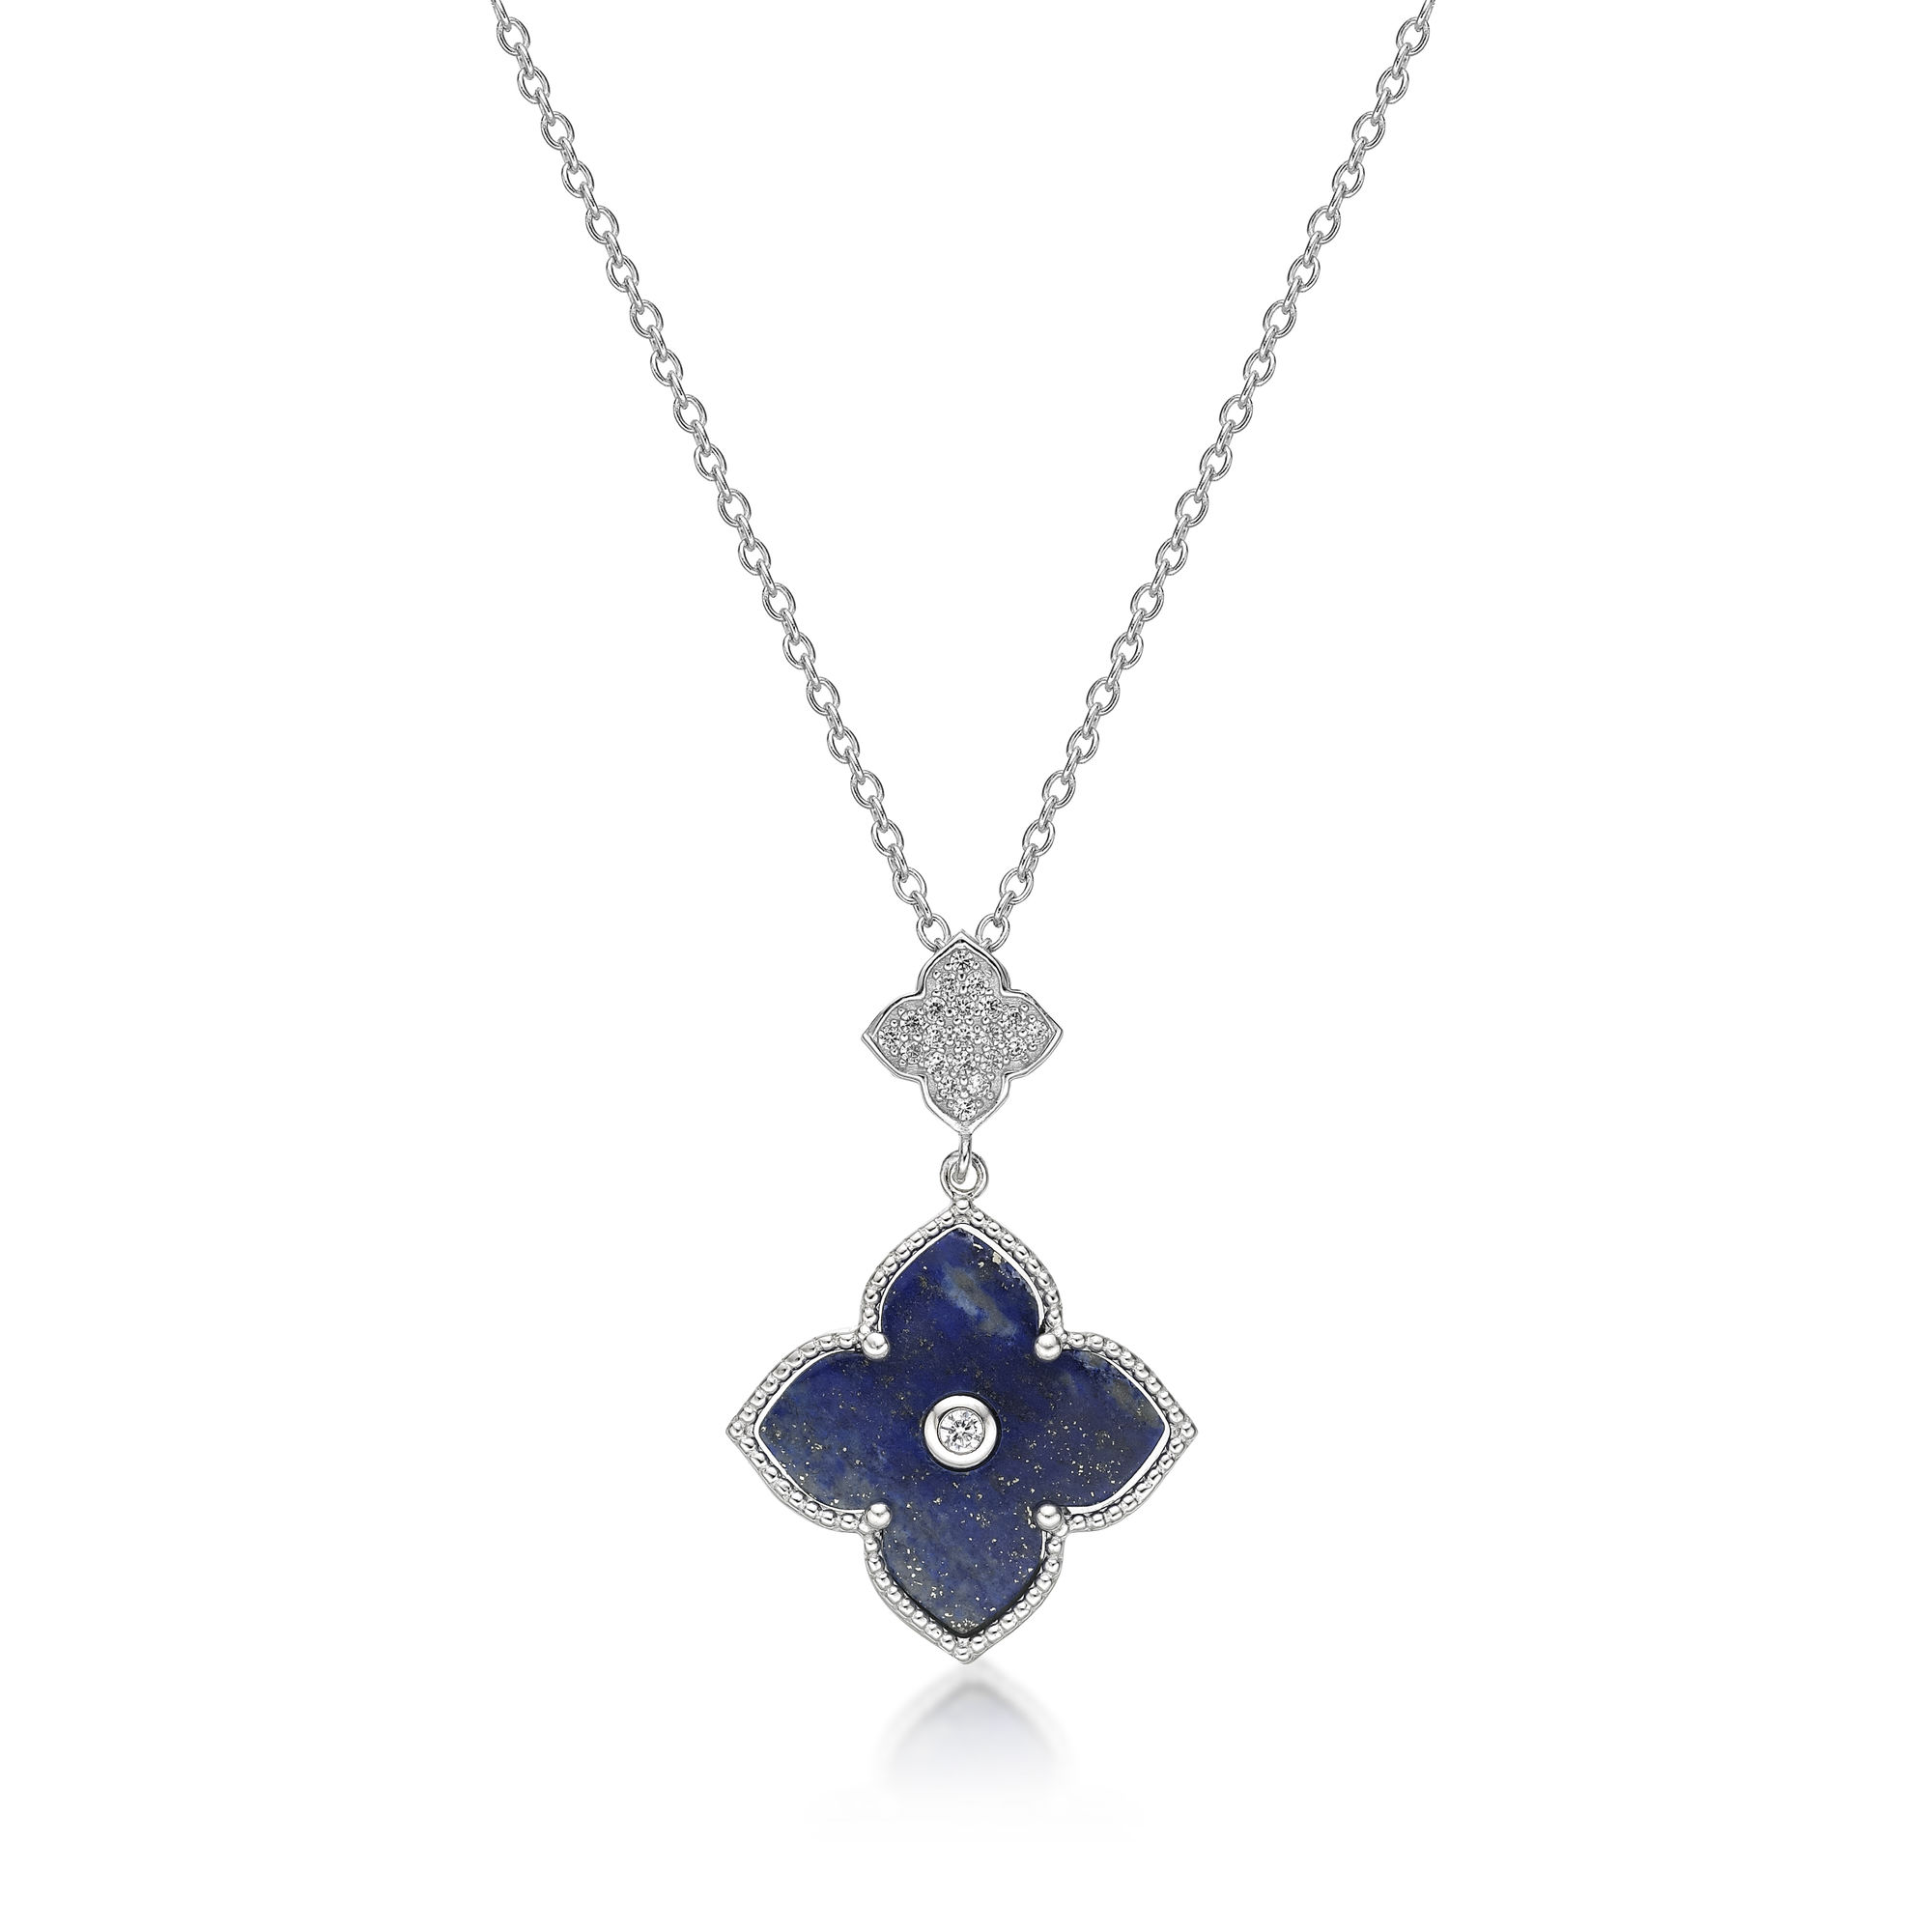 Women's Lapis Lazuli Double Flower Pendant Necklace in 925 Sterling Silver with Cubic Zirconia - 16-18 Inch Adjustable Cable Chain - Flora | Lavari Jewelers